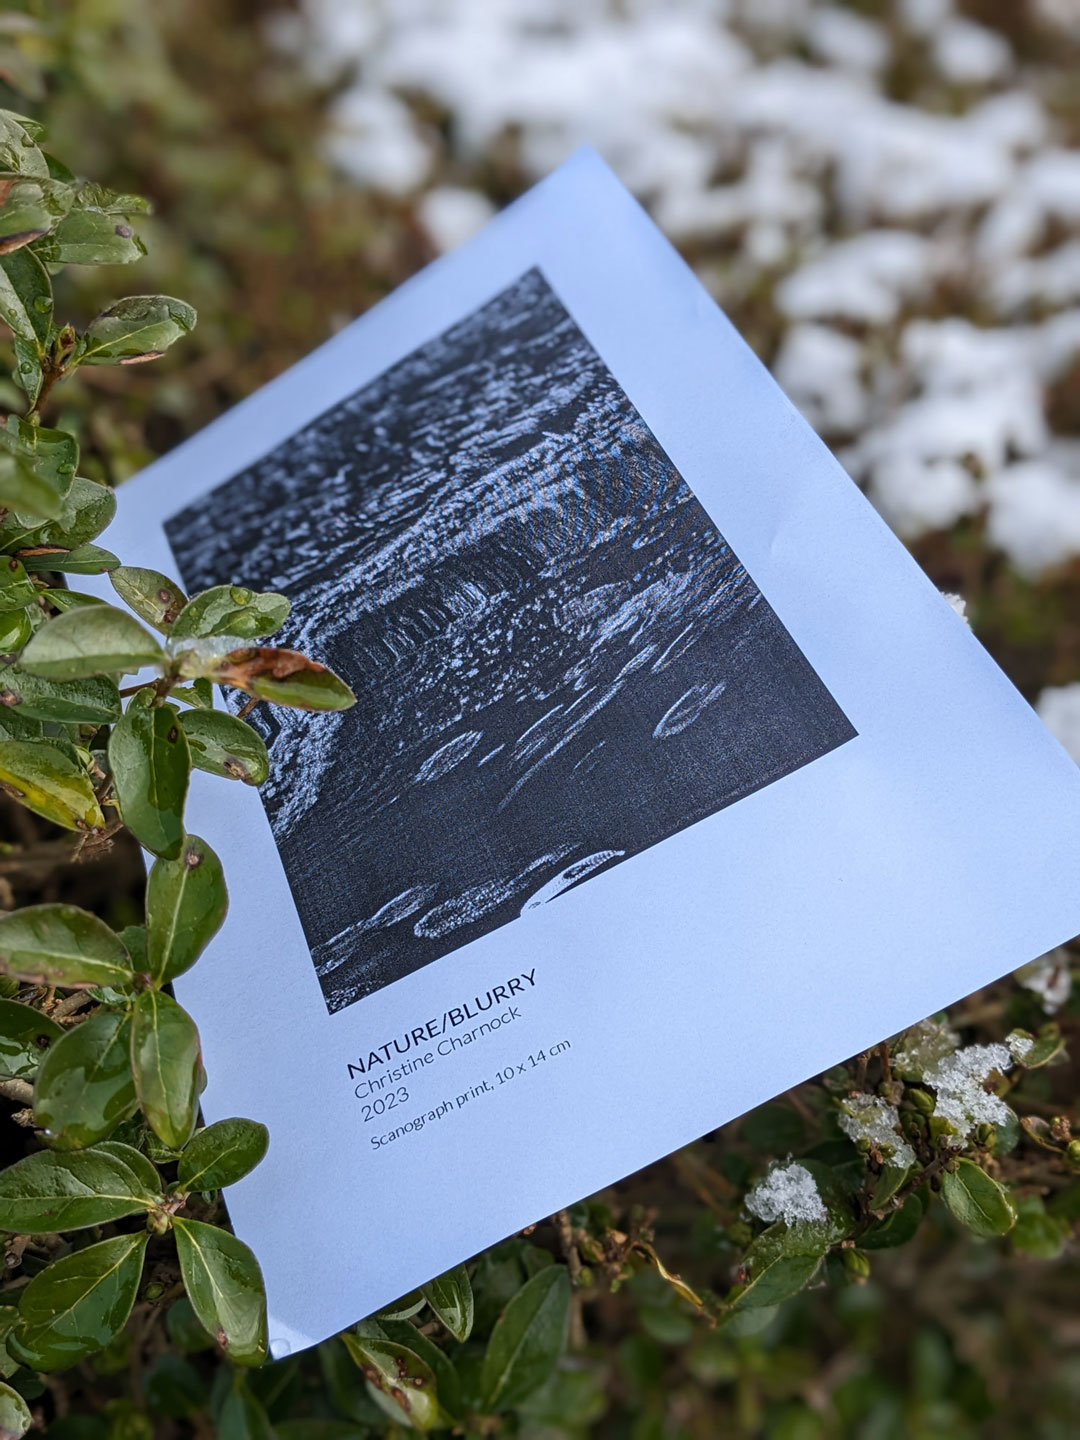 A close-up photograph showing a print titled 'Nature/Blurry' stuck in a green hedge. In the out-of-focus background, snow can be seen. 